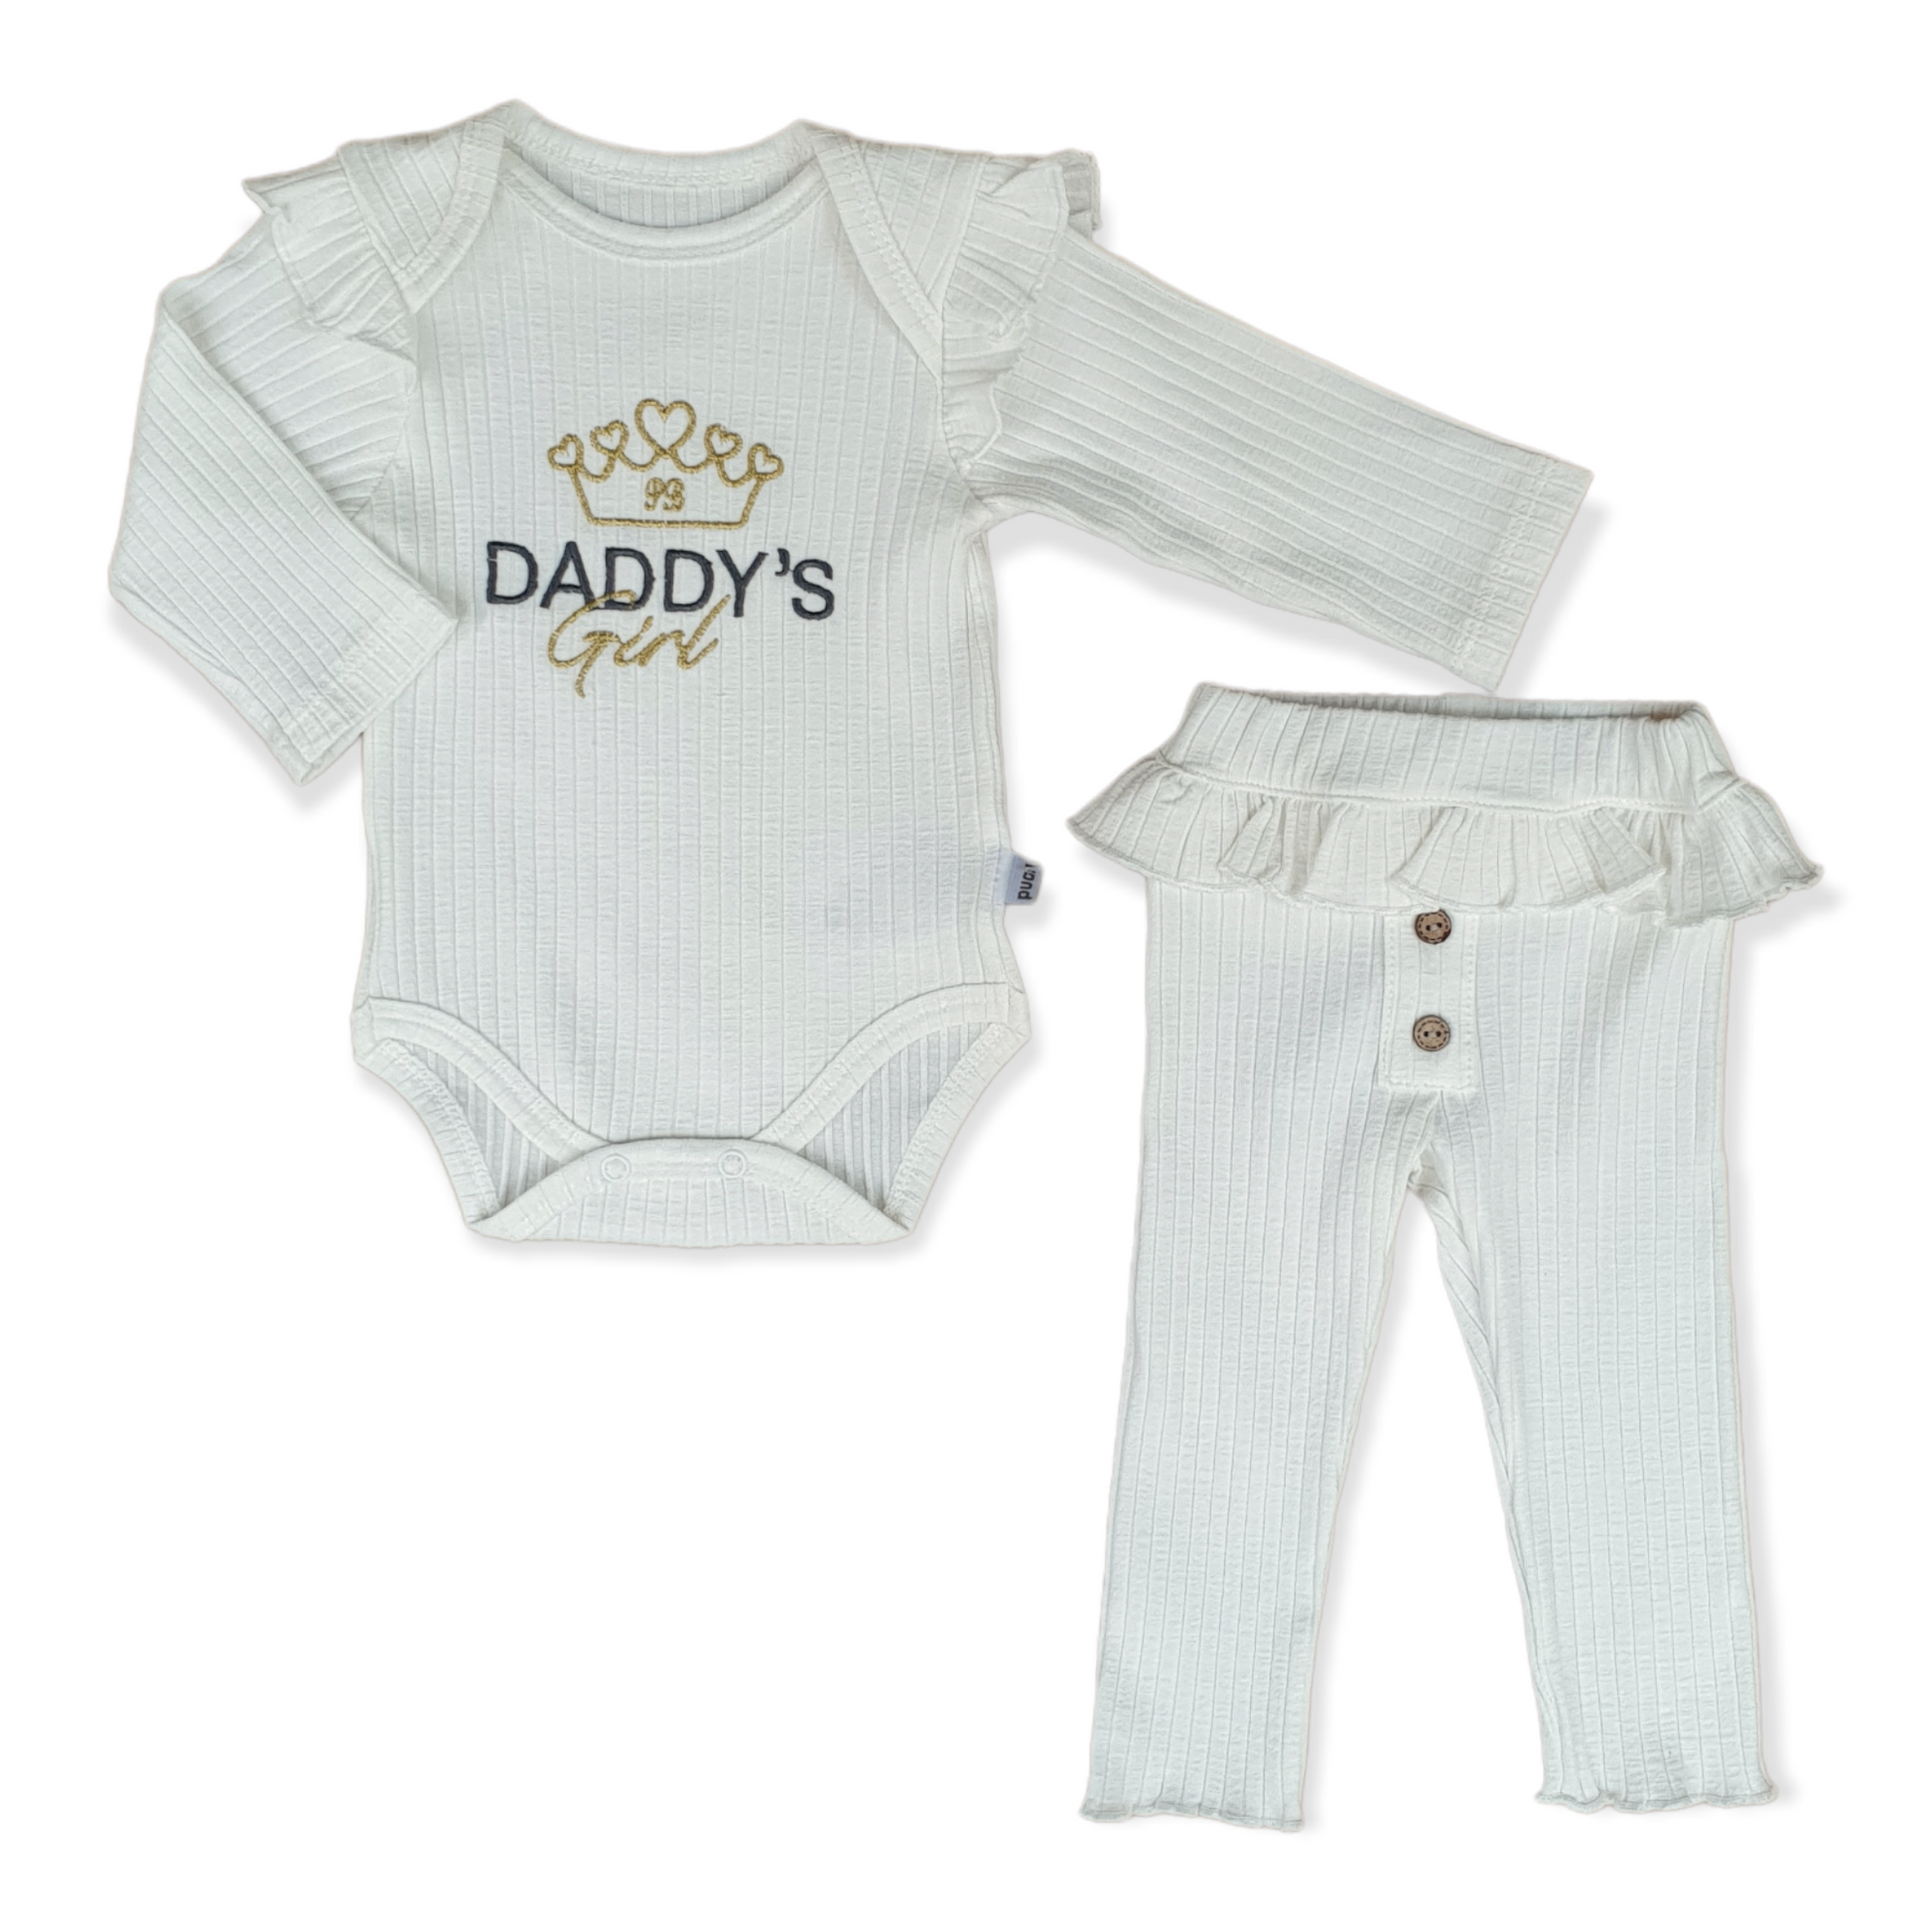 Puanbaby - Long Sleeve Off-White Daddy's Girl Body with Pants